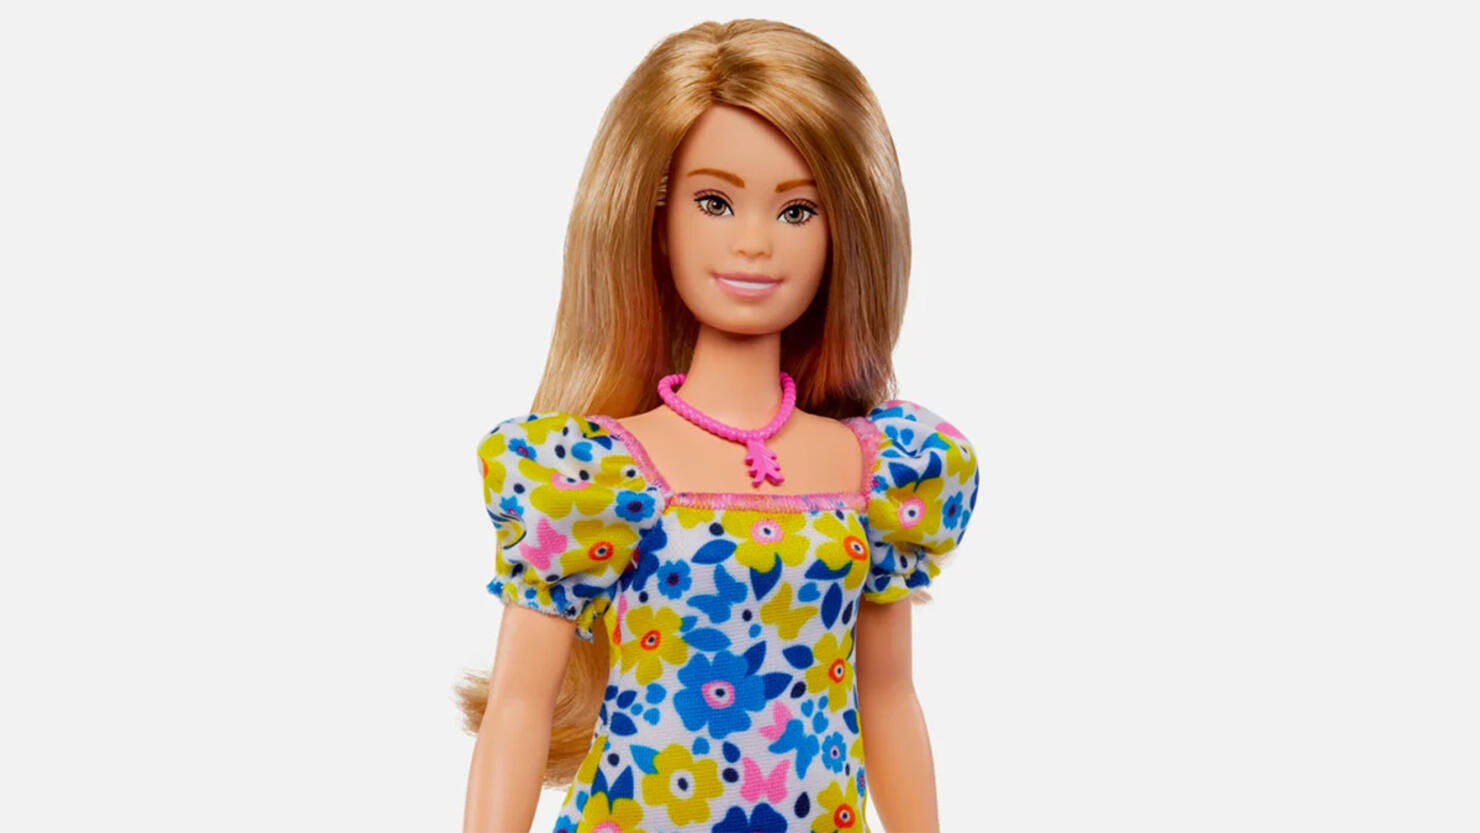 Mattel introduced its first Barbie doll representing a person with Down syndrome.